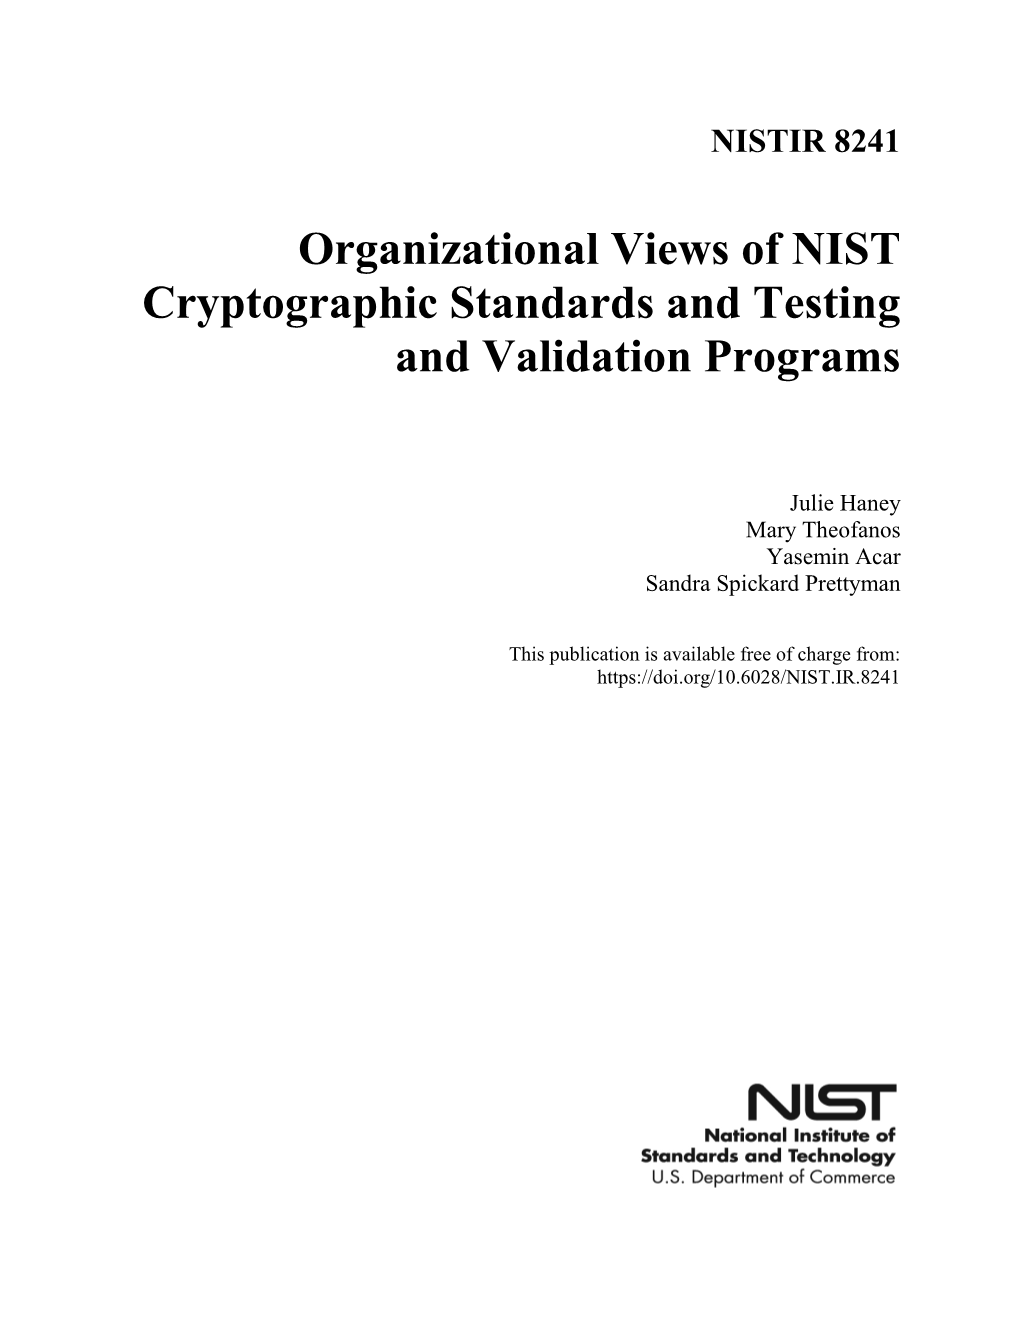 Organizational Views of NIST Cryptographic Standards and Testing and Validation Programs